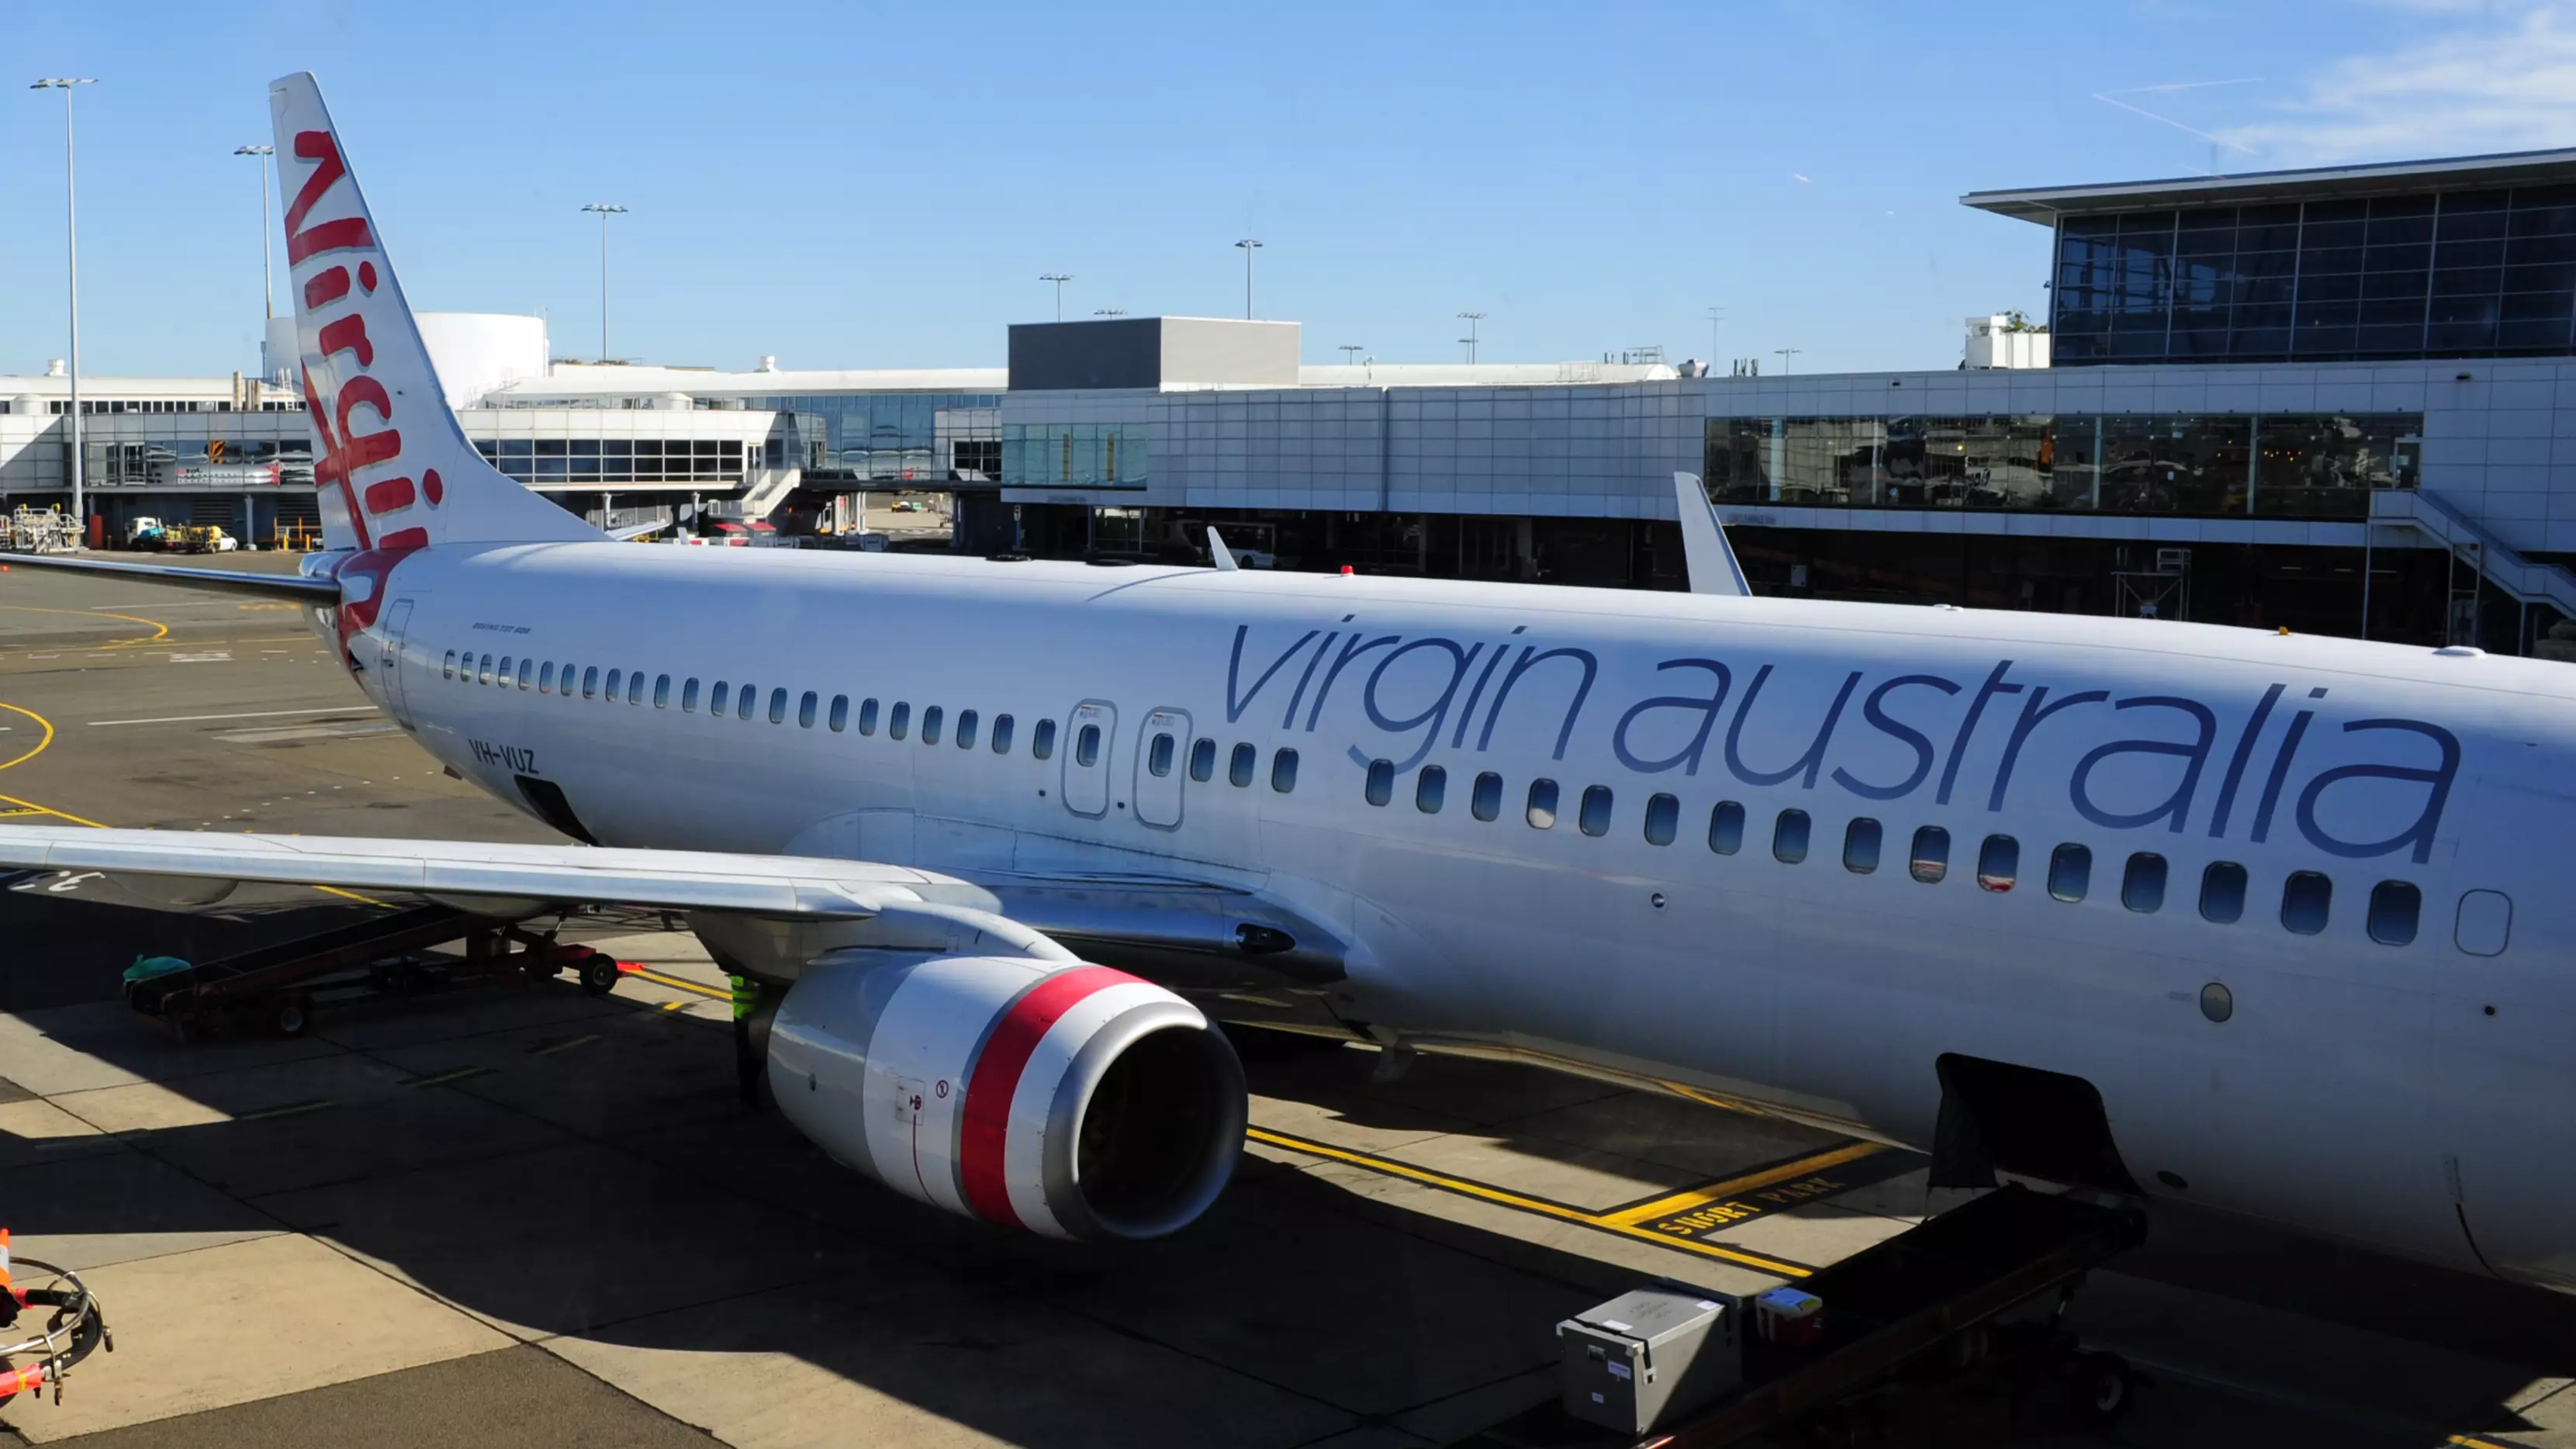 Virgin Australia On The Brink Of Falling Into Voluntary Administration